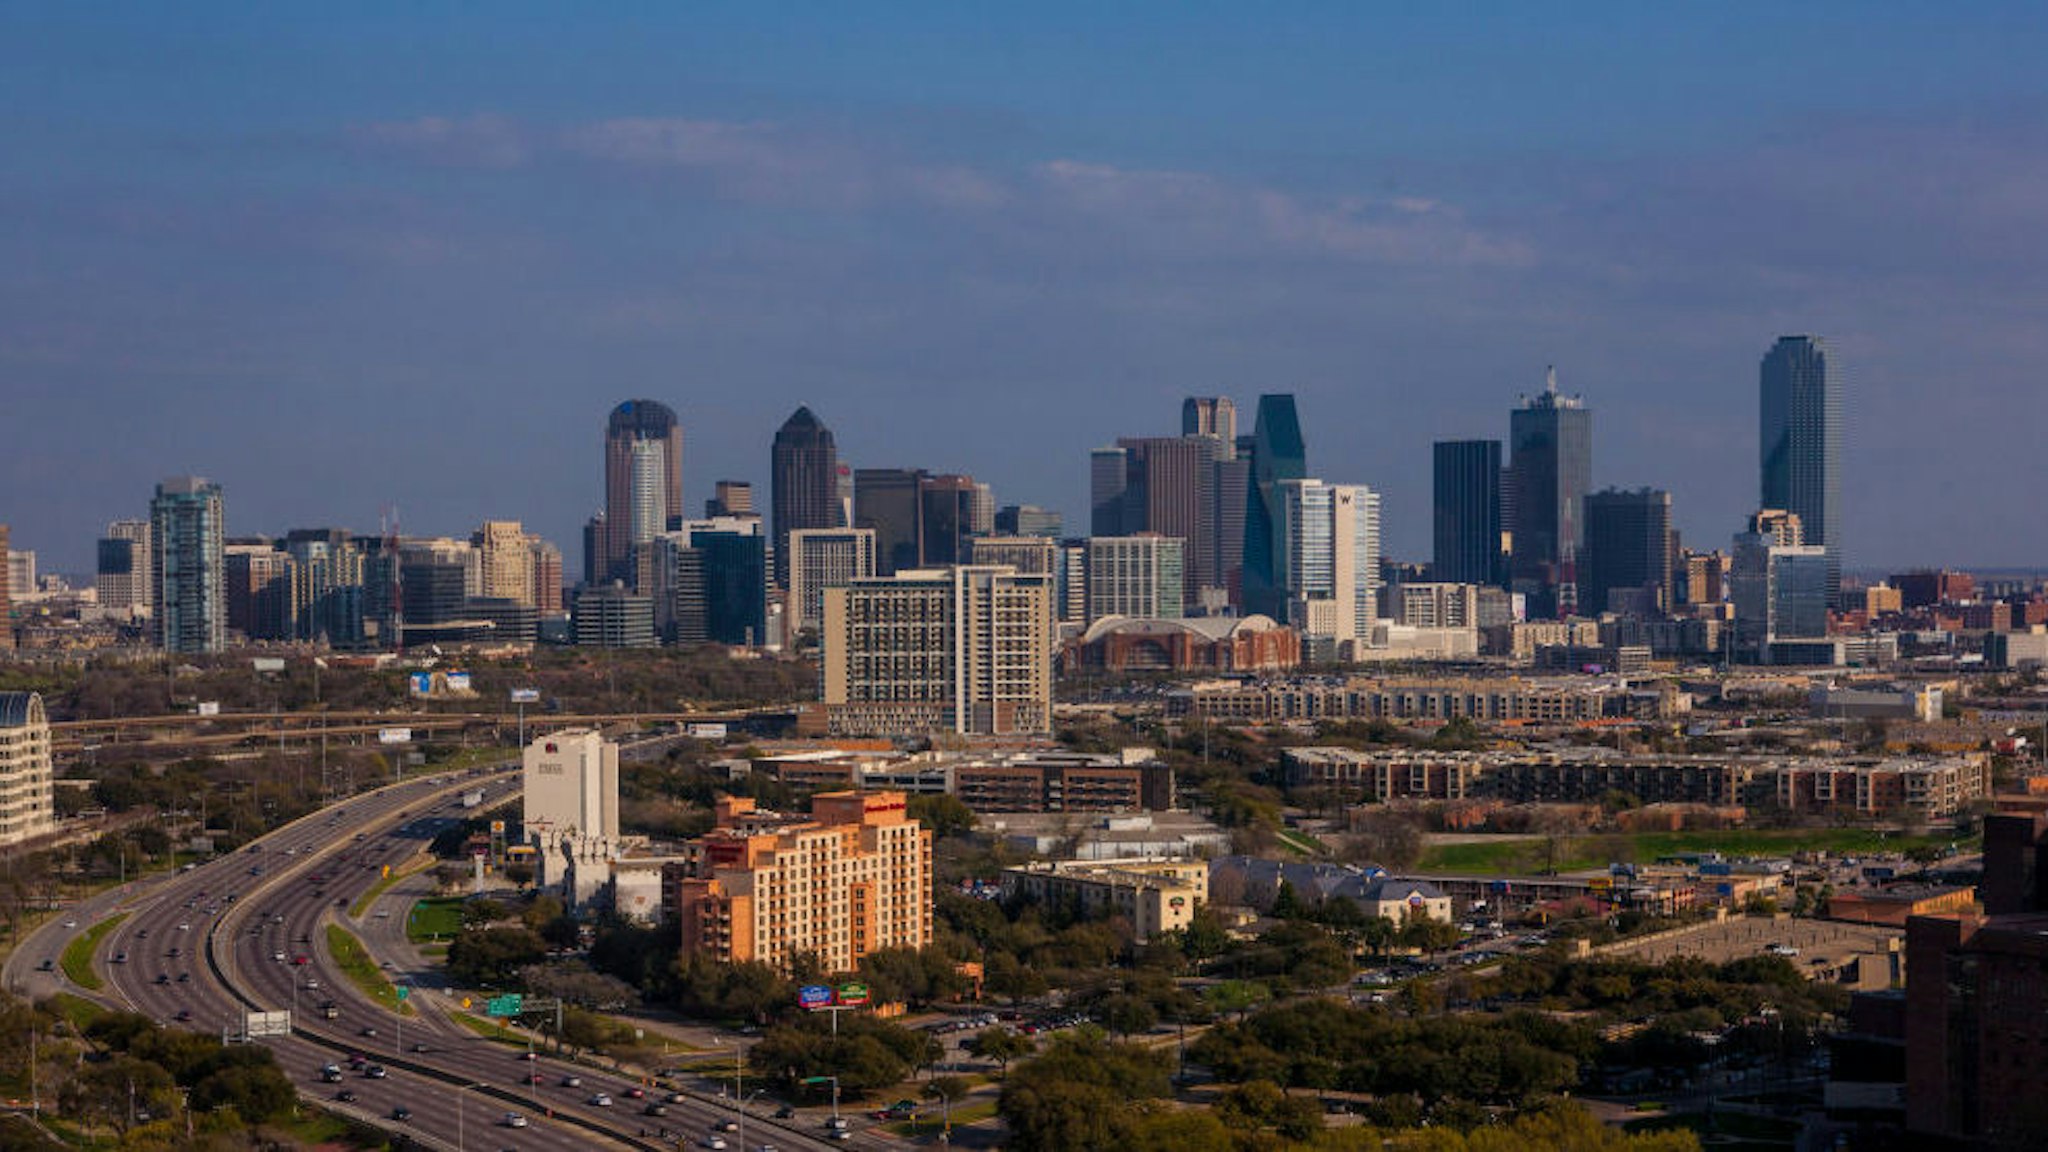 The downtown skyline is viewed from the Renaissance Hotel off Stemmons Highway on March 20, 2013 in Dallas, Texas. Dallas, a major hub of technology, energy, medical research, and commerce, is the fourth largest metropolitan center in the United States. (Photo by George Rose/Getty Images)